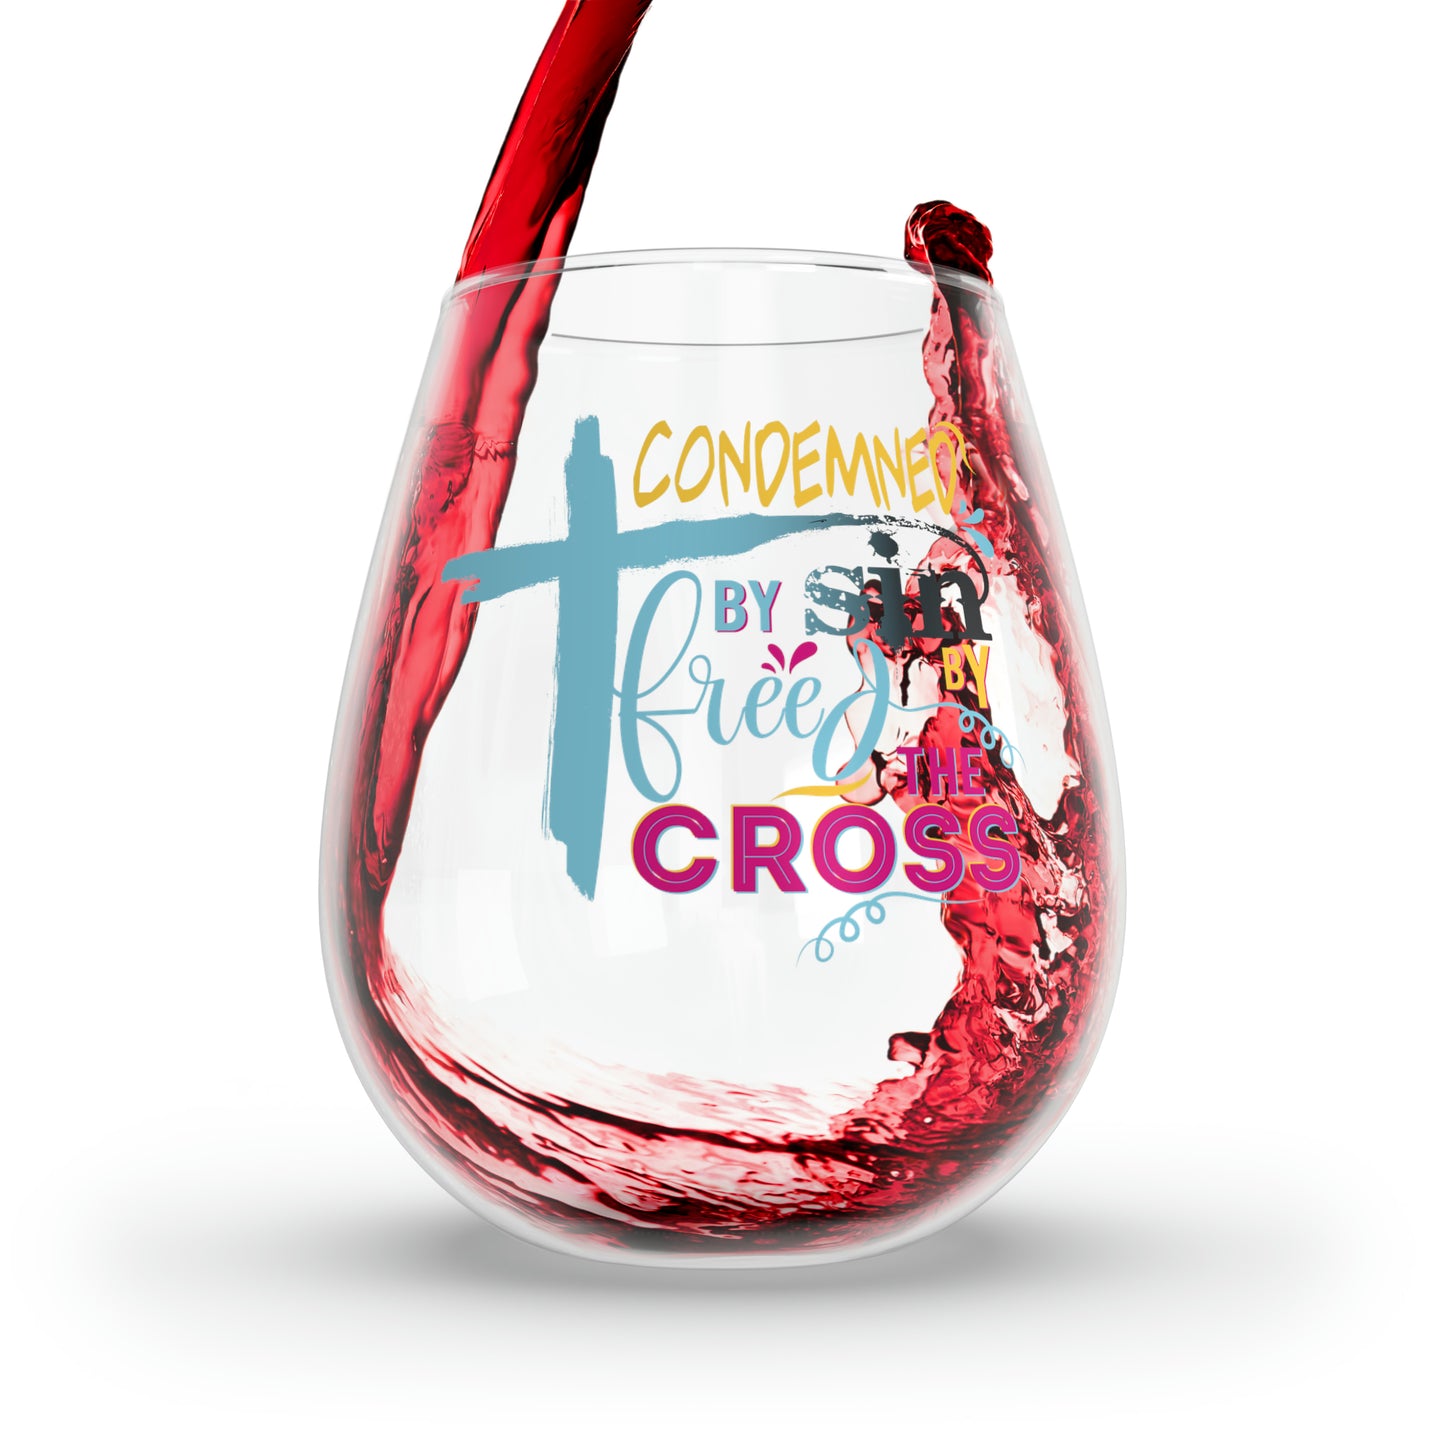 Condemned By Sin Freed By The Cross Stemless Wine Glass, 11.75oz